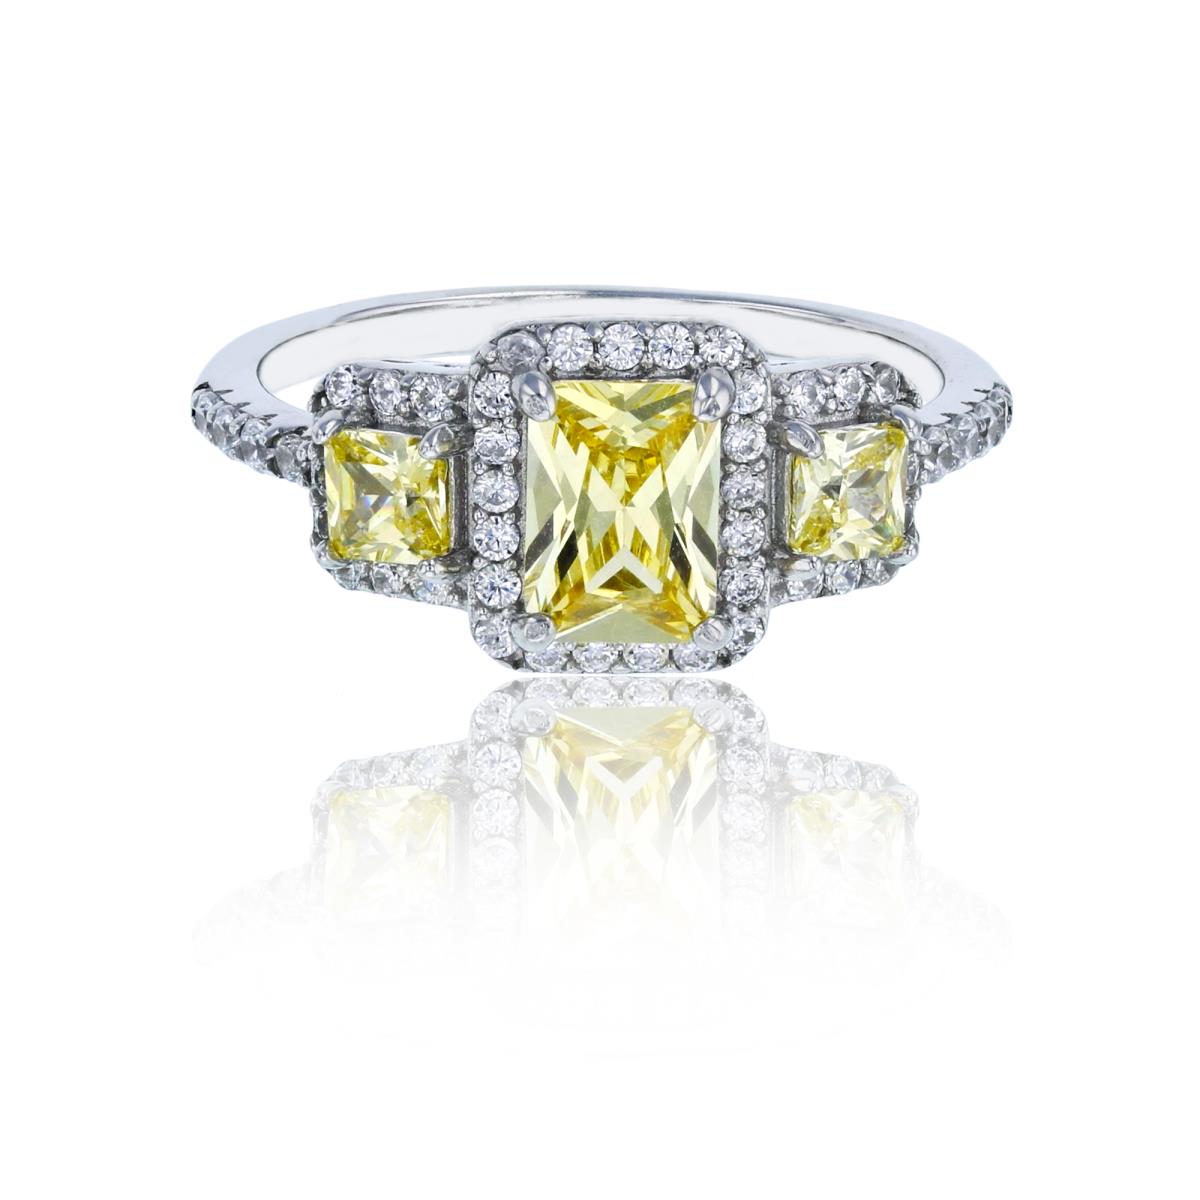 Sterling Silver Rhodium Canary Yellow 7x5mm Emerald Cut with 3.5mm Princess Cut Sides Halo Ring